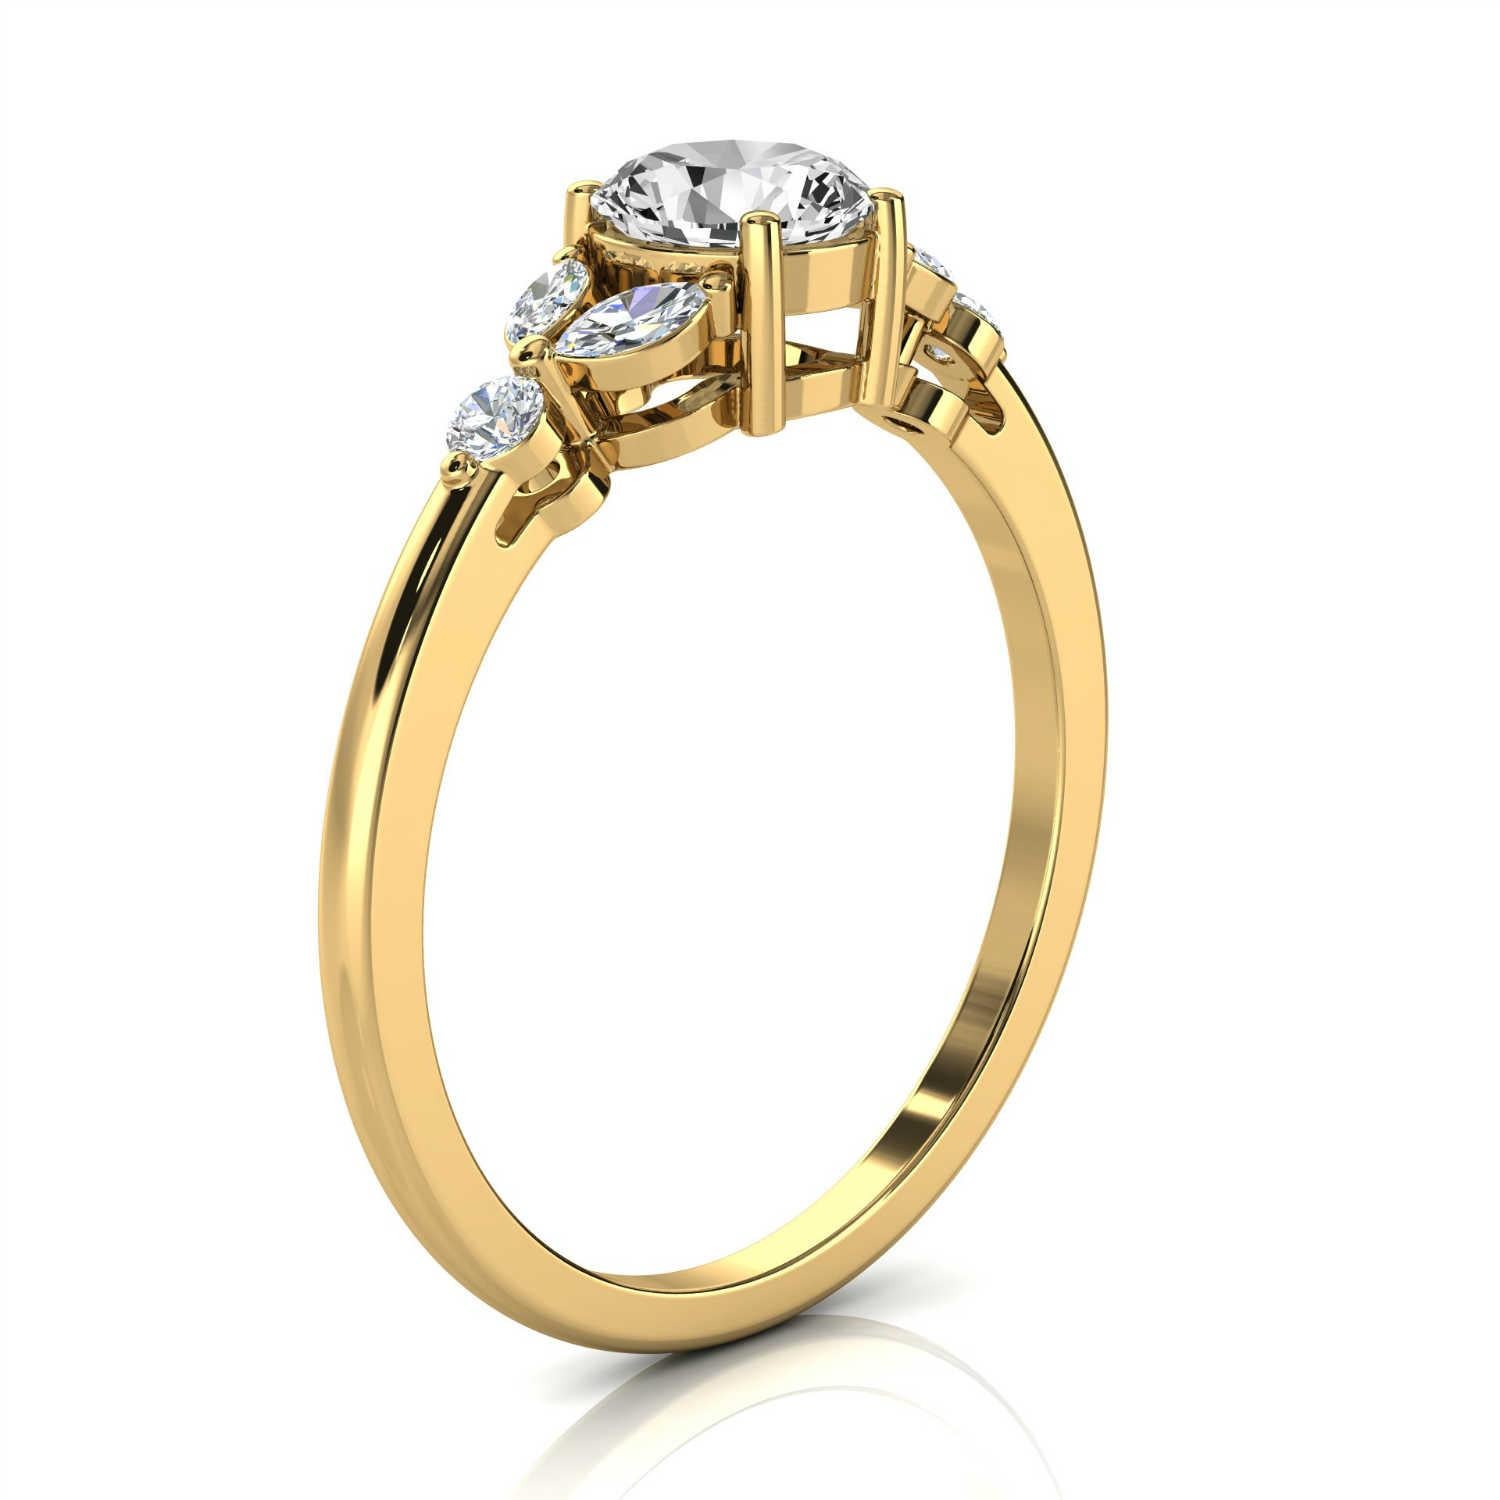 This petite handcrafted earthy, organically designed ring features 1/2 Carat Round diamond flanked by marquise and round shape diamonds on a 1.2 mm wide shank adds to its rustic style. Experience the difference in person!

Product details: 

Center